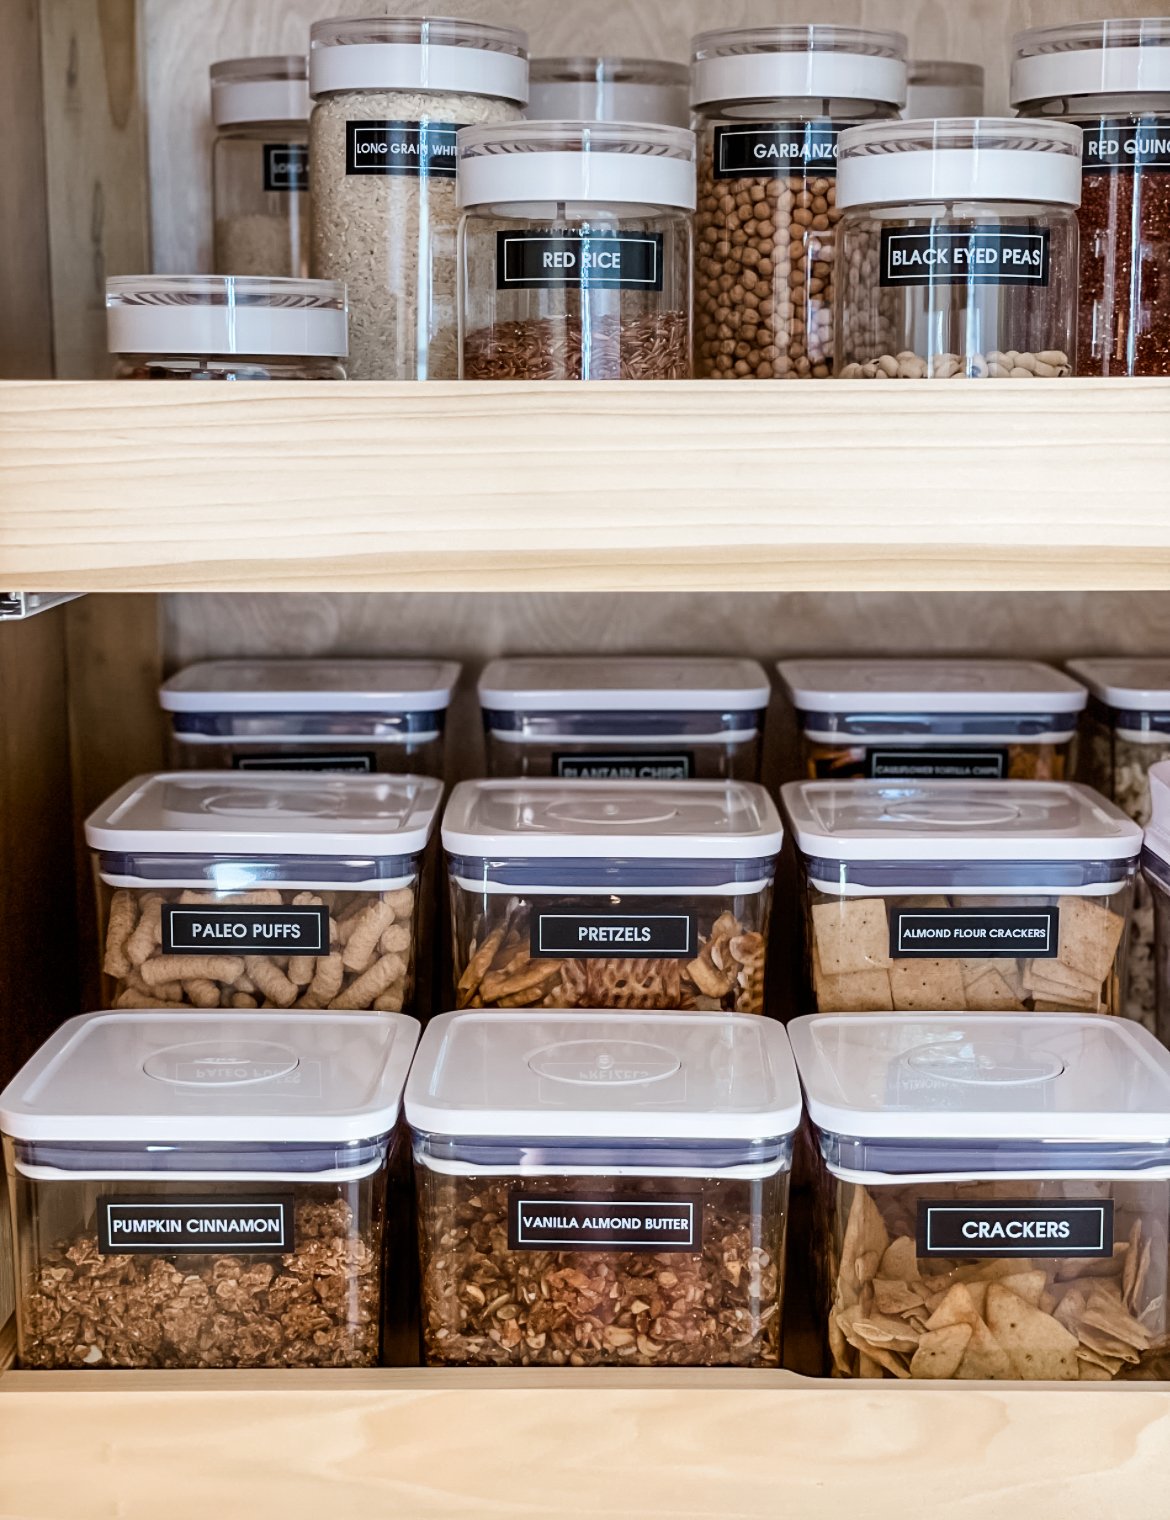 Pantry with Clear Chip Organizers